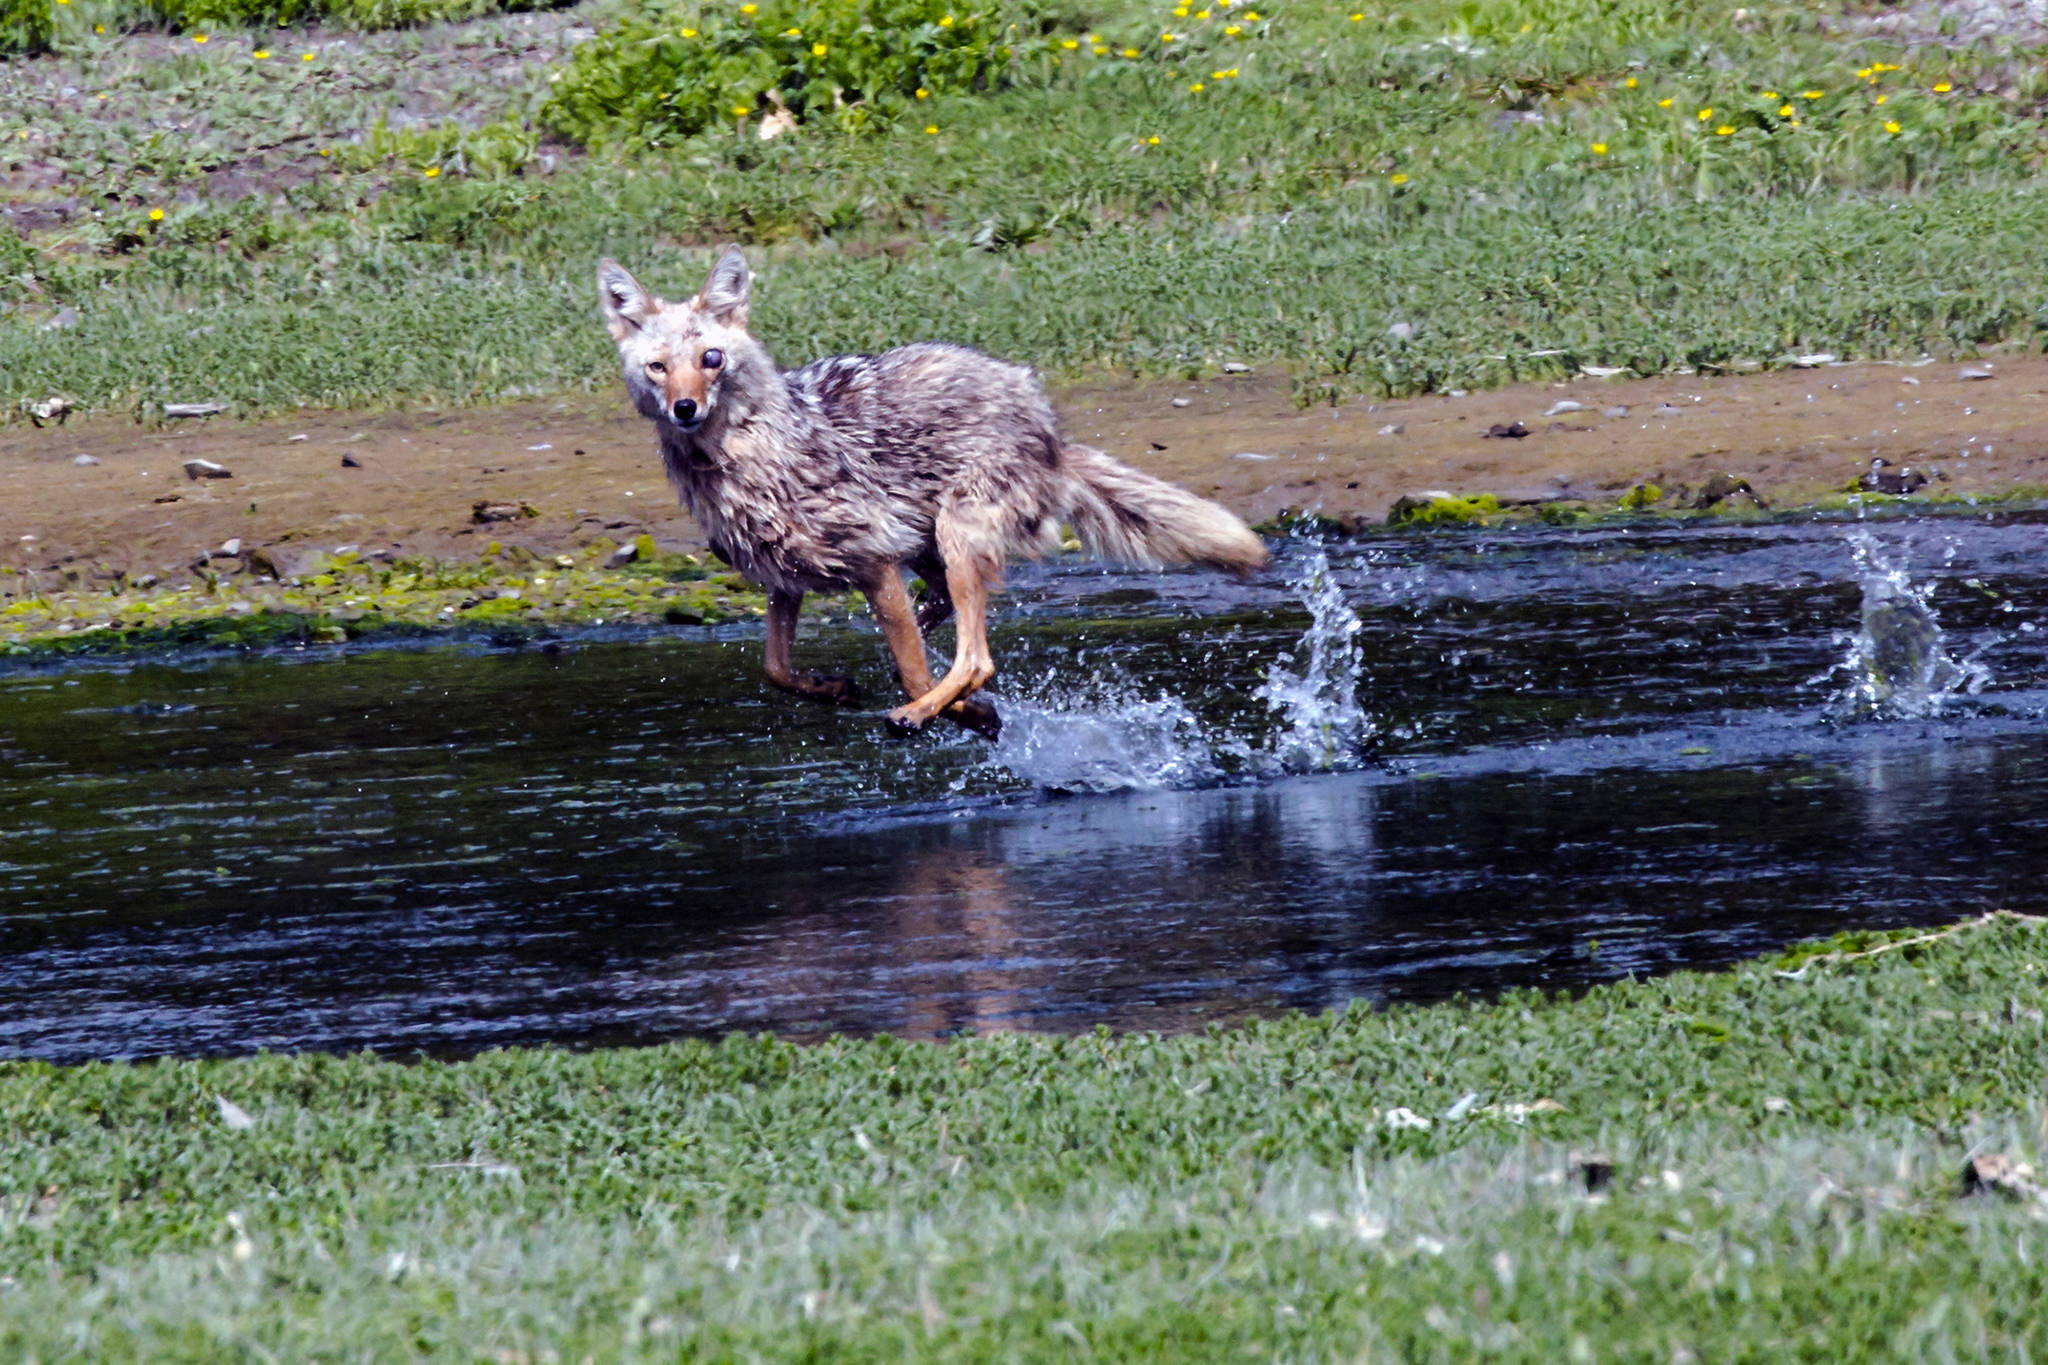 A coyote is seen near Excursion Inlet on June 8, 2019. The eye trauma may have been the result of a tangle with a porcupine, the photographer guessed. (Courtesy Photo | Jack Beedle)